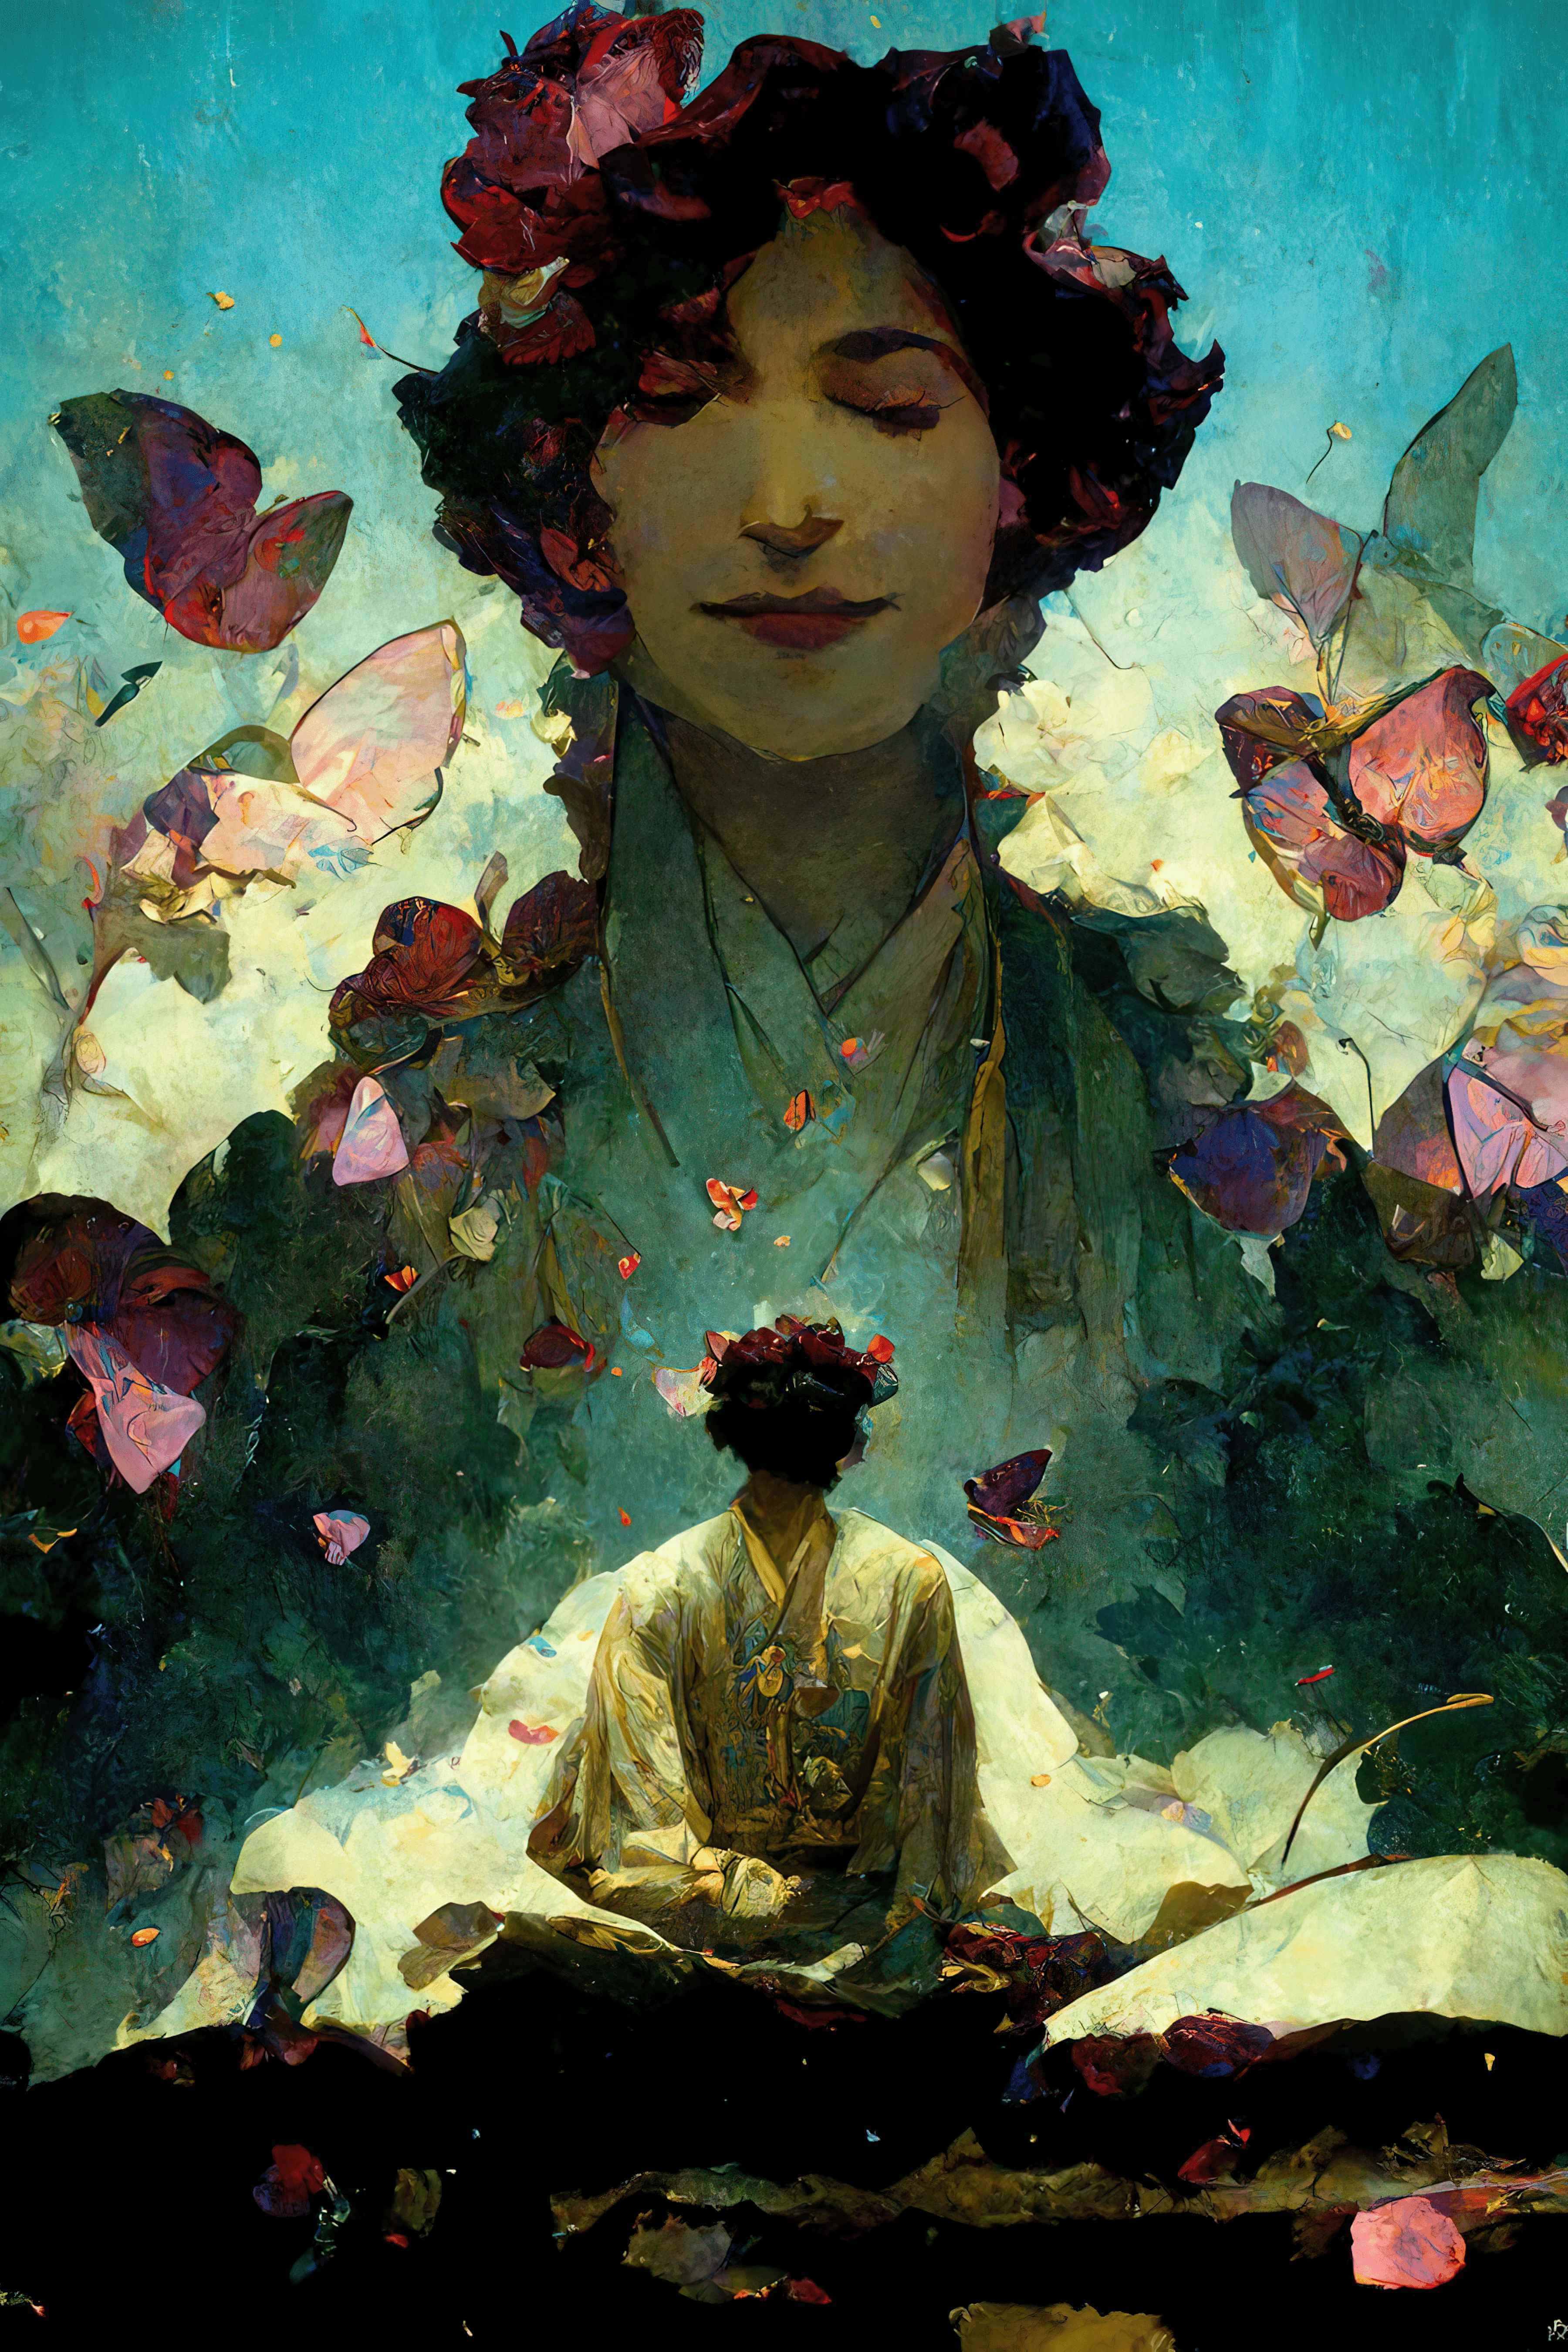 A painterly illustration of a large face floating above someone meditating. The large face is peaceful and smiling with flowers in their hair. At the bottom of the picture, a person meditating is wearing flowing robes of cream and gold. The color palette is muted with mint greens and pastel blues. Large magenta butterflies are on either side. The scene is peaceful. 